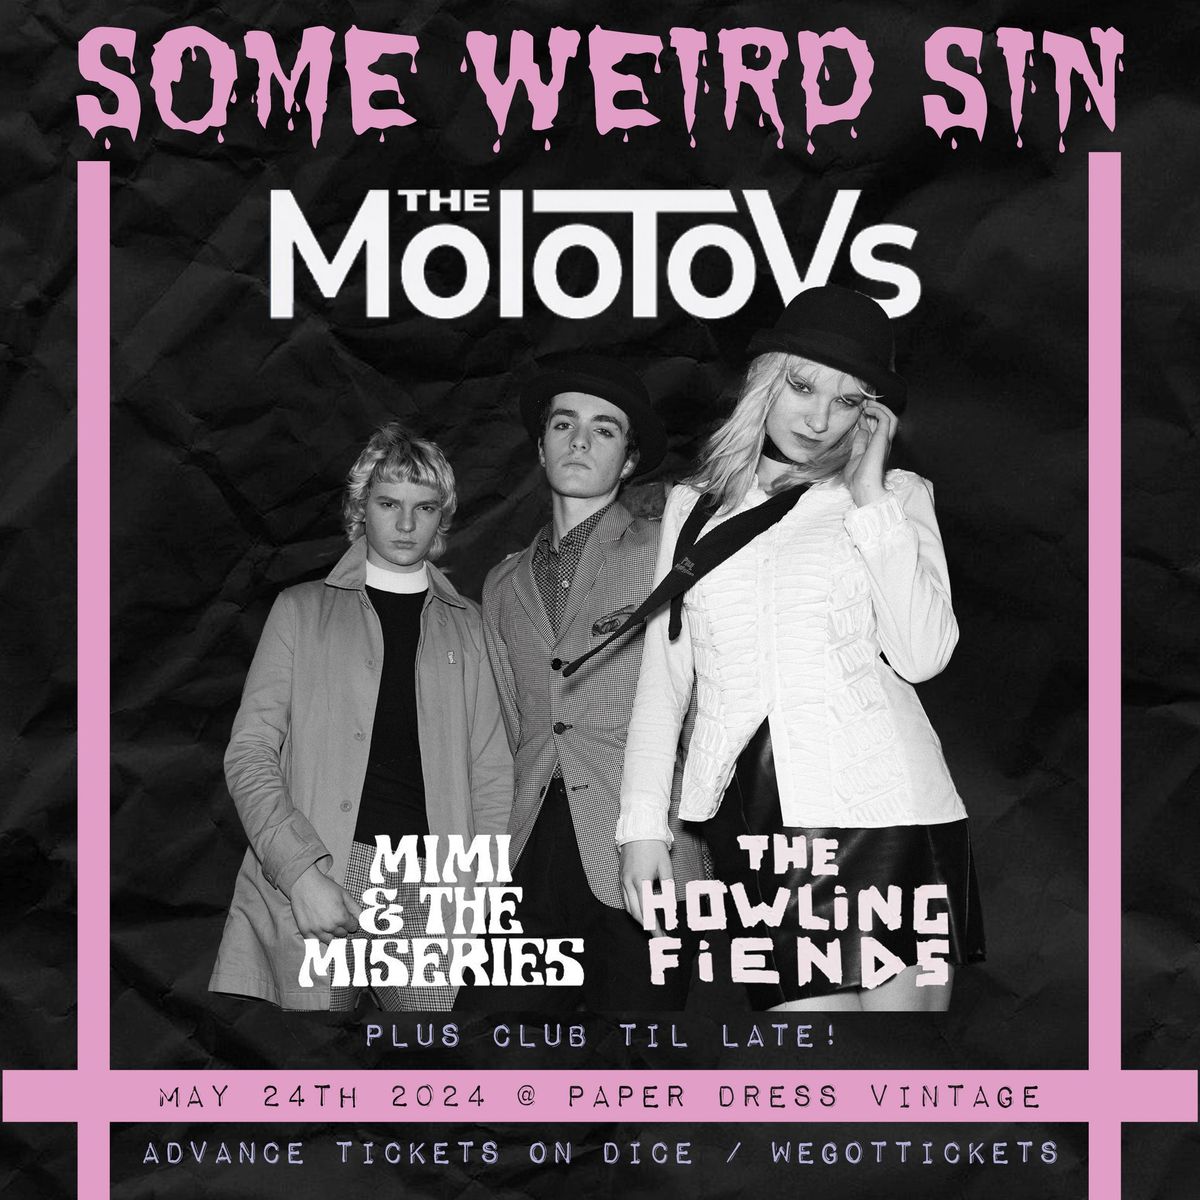 Some Weird Sin: The Molotovs + Mimi & The Miseries + The Howling Fiends